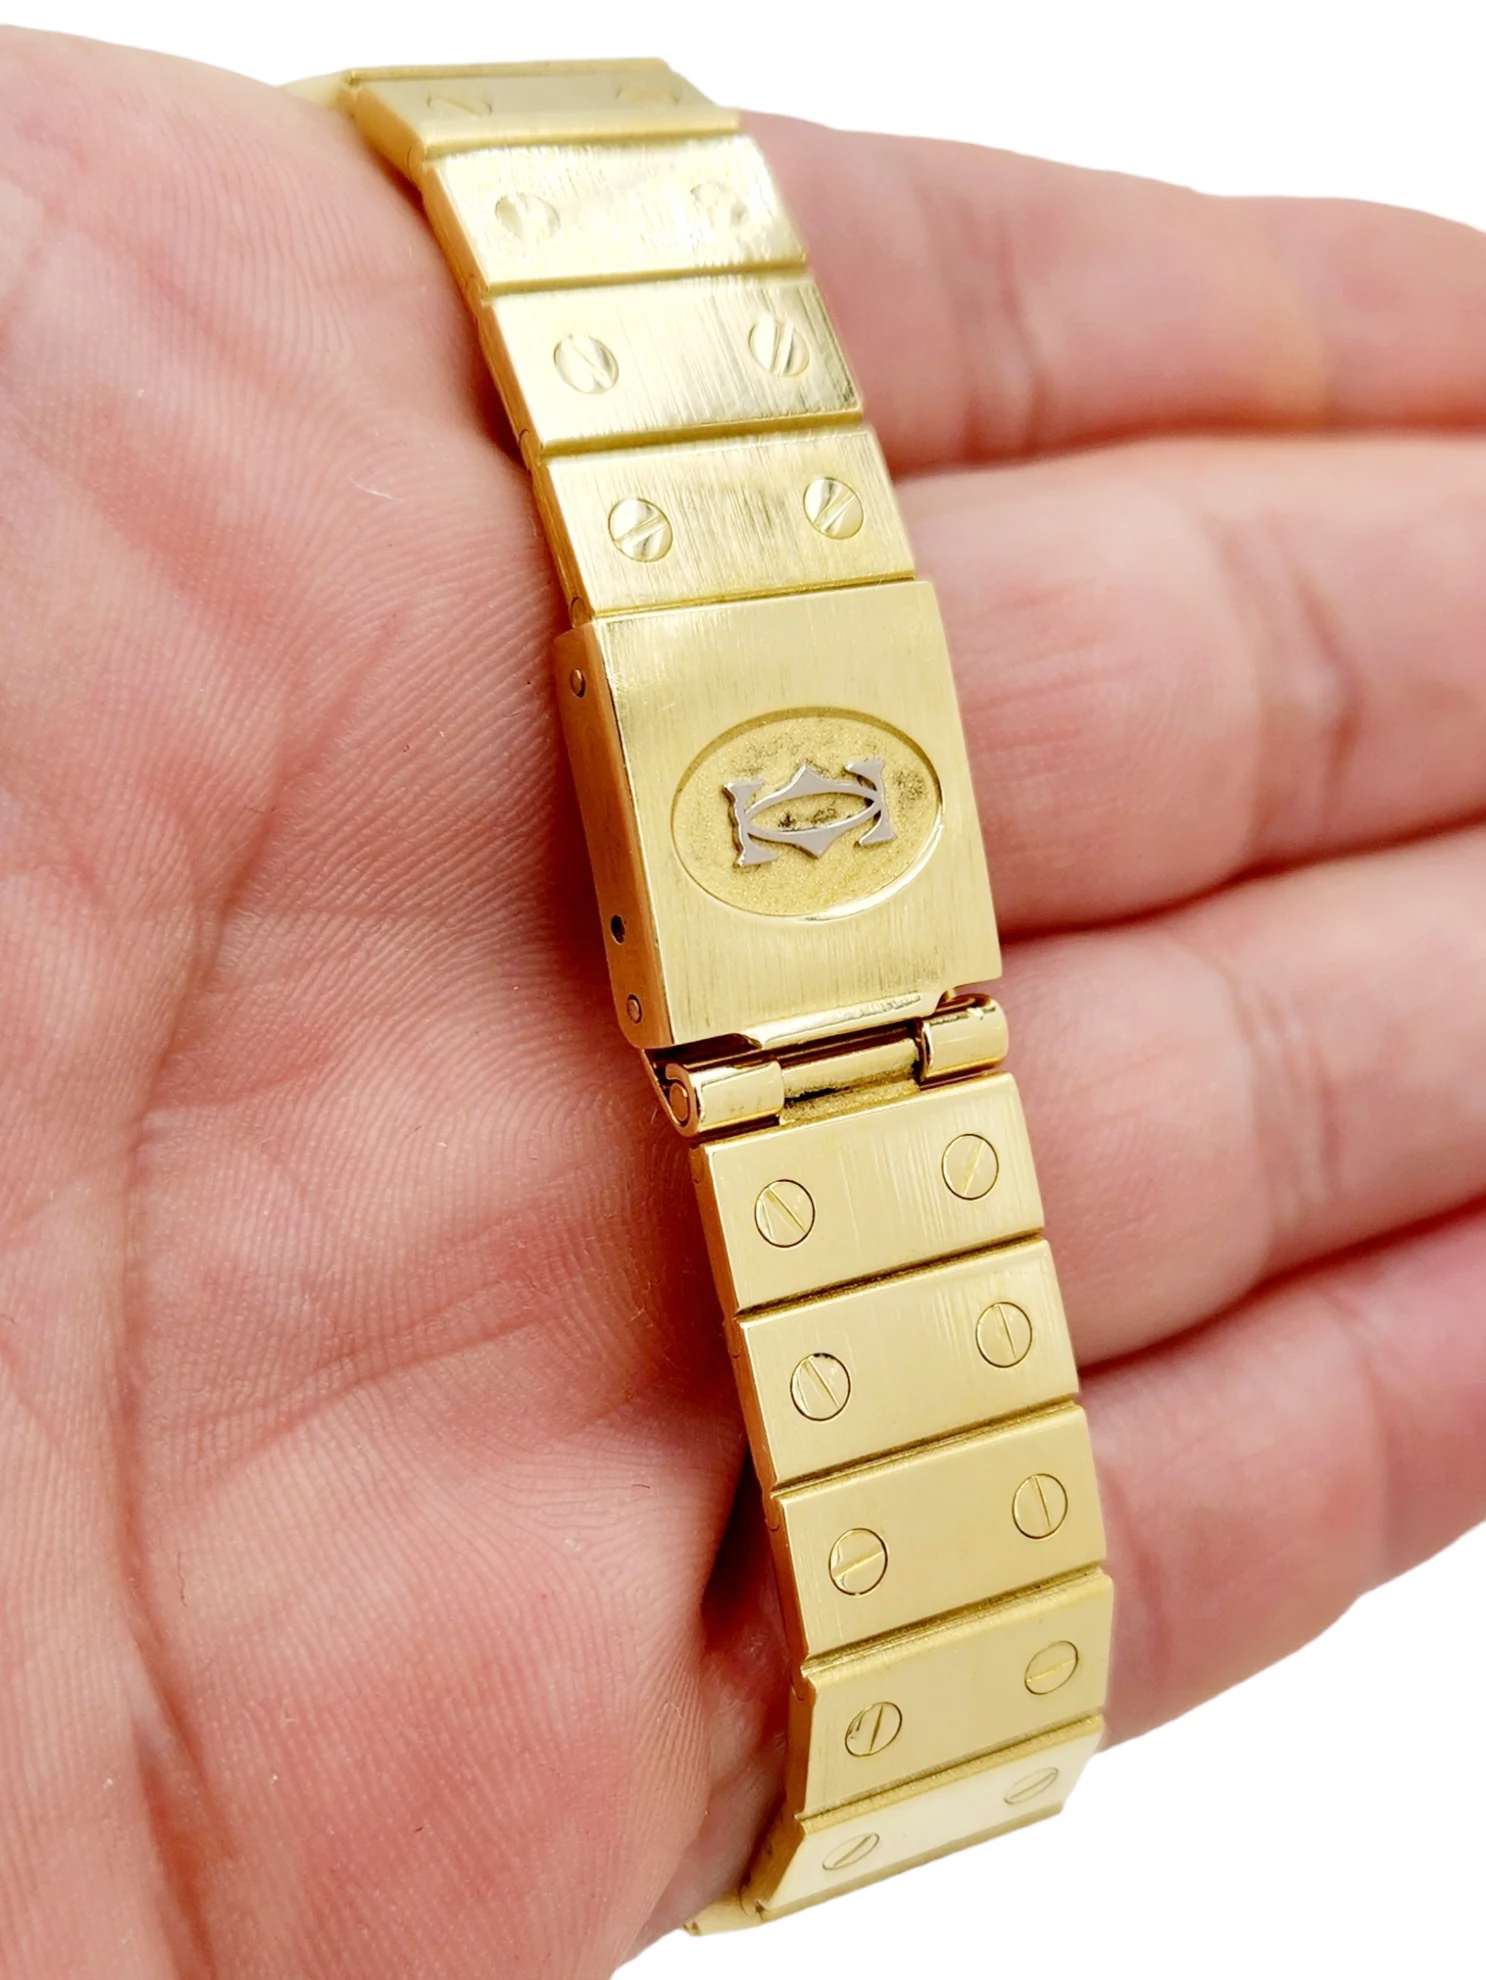 Men's Large Cartier Santos Solid 18K Yellow Gold Watch with Gold Dial and Diamond Bezel. (Pre-Owned)